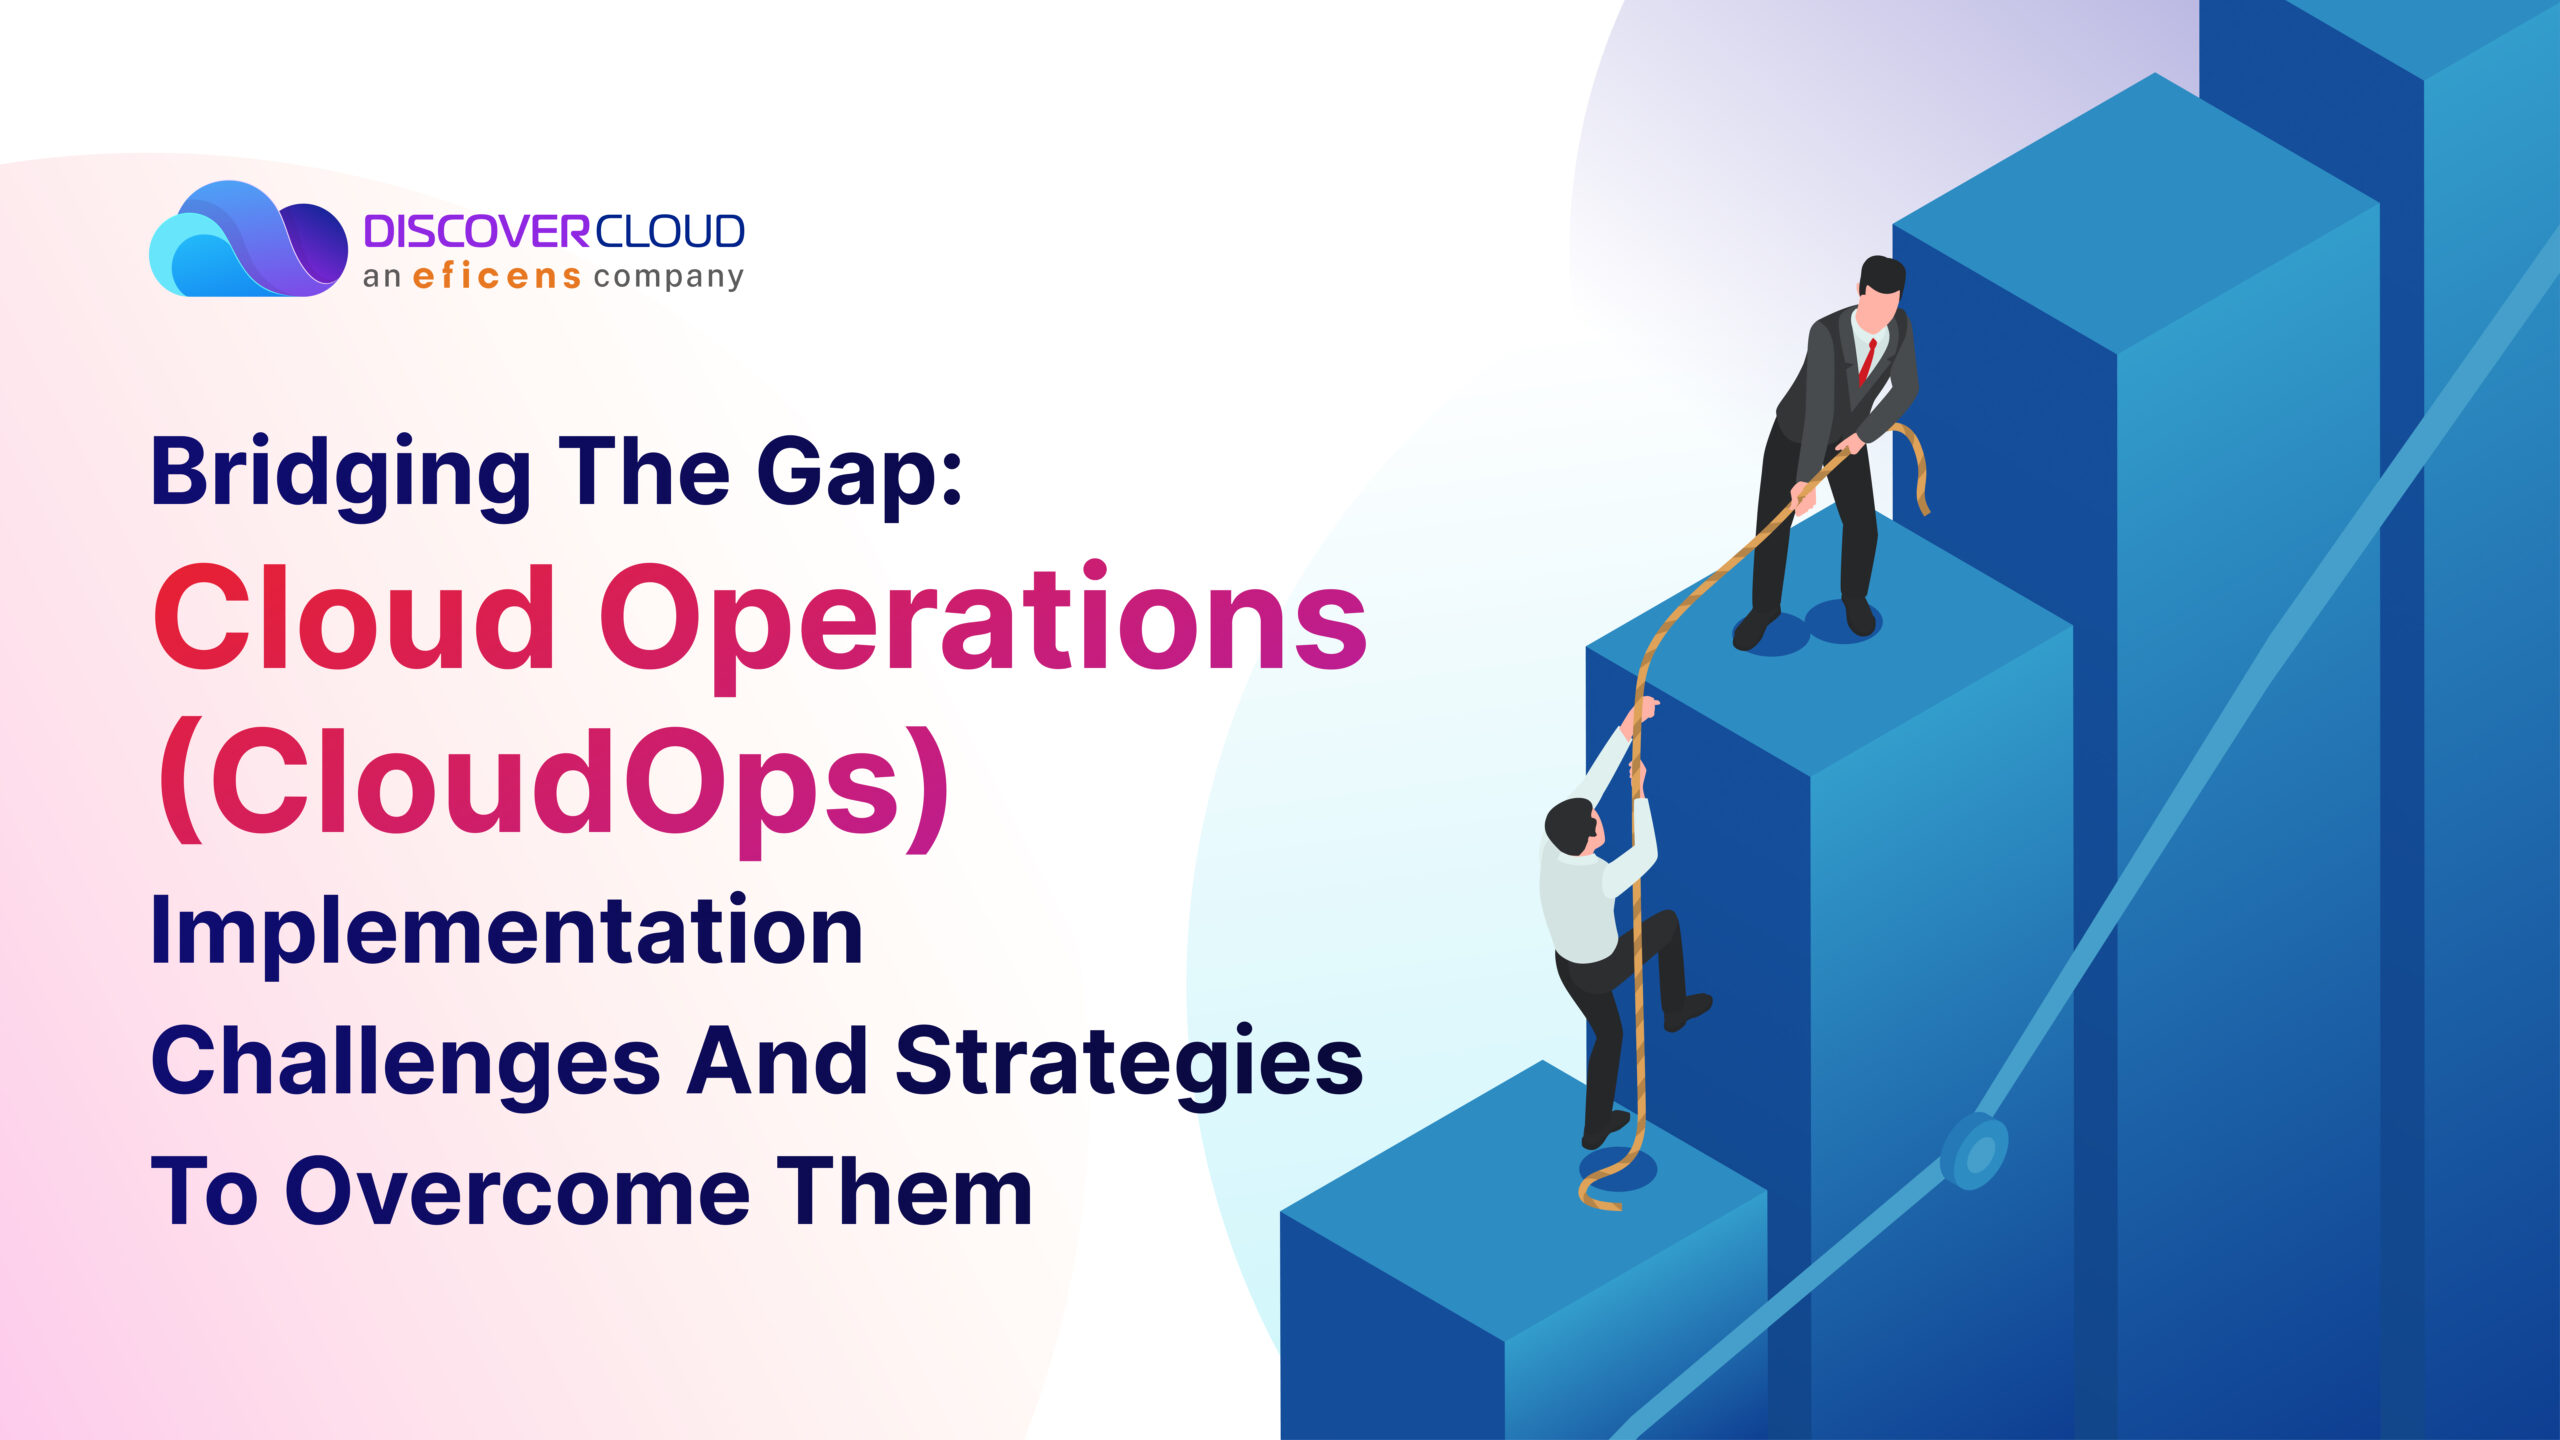 CloudOps - Cloud Operations